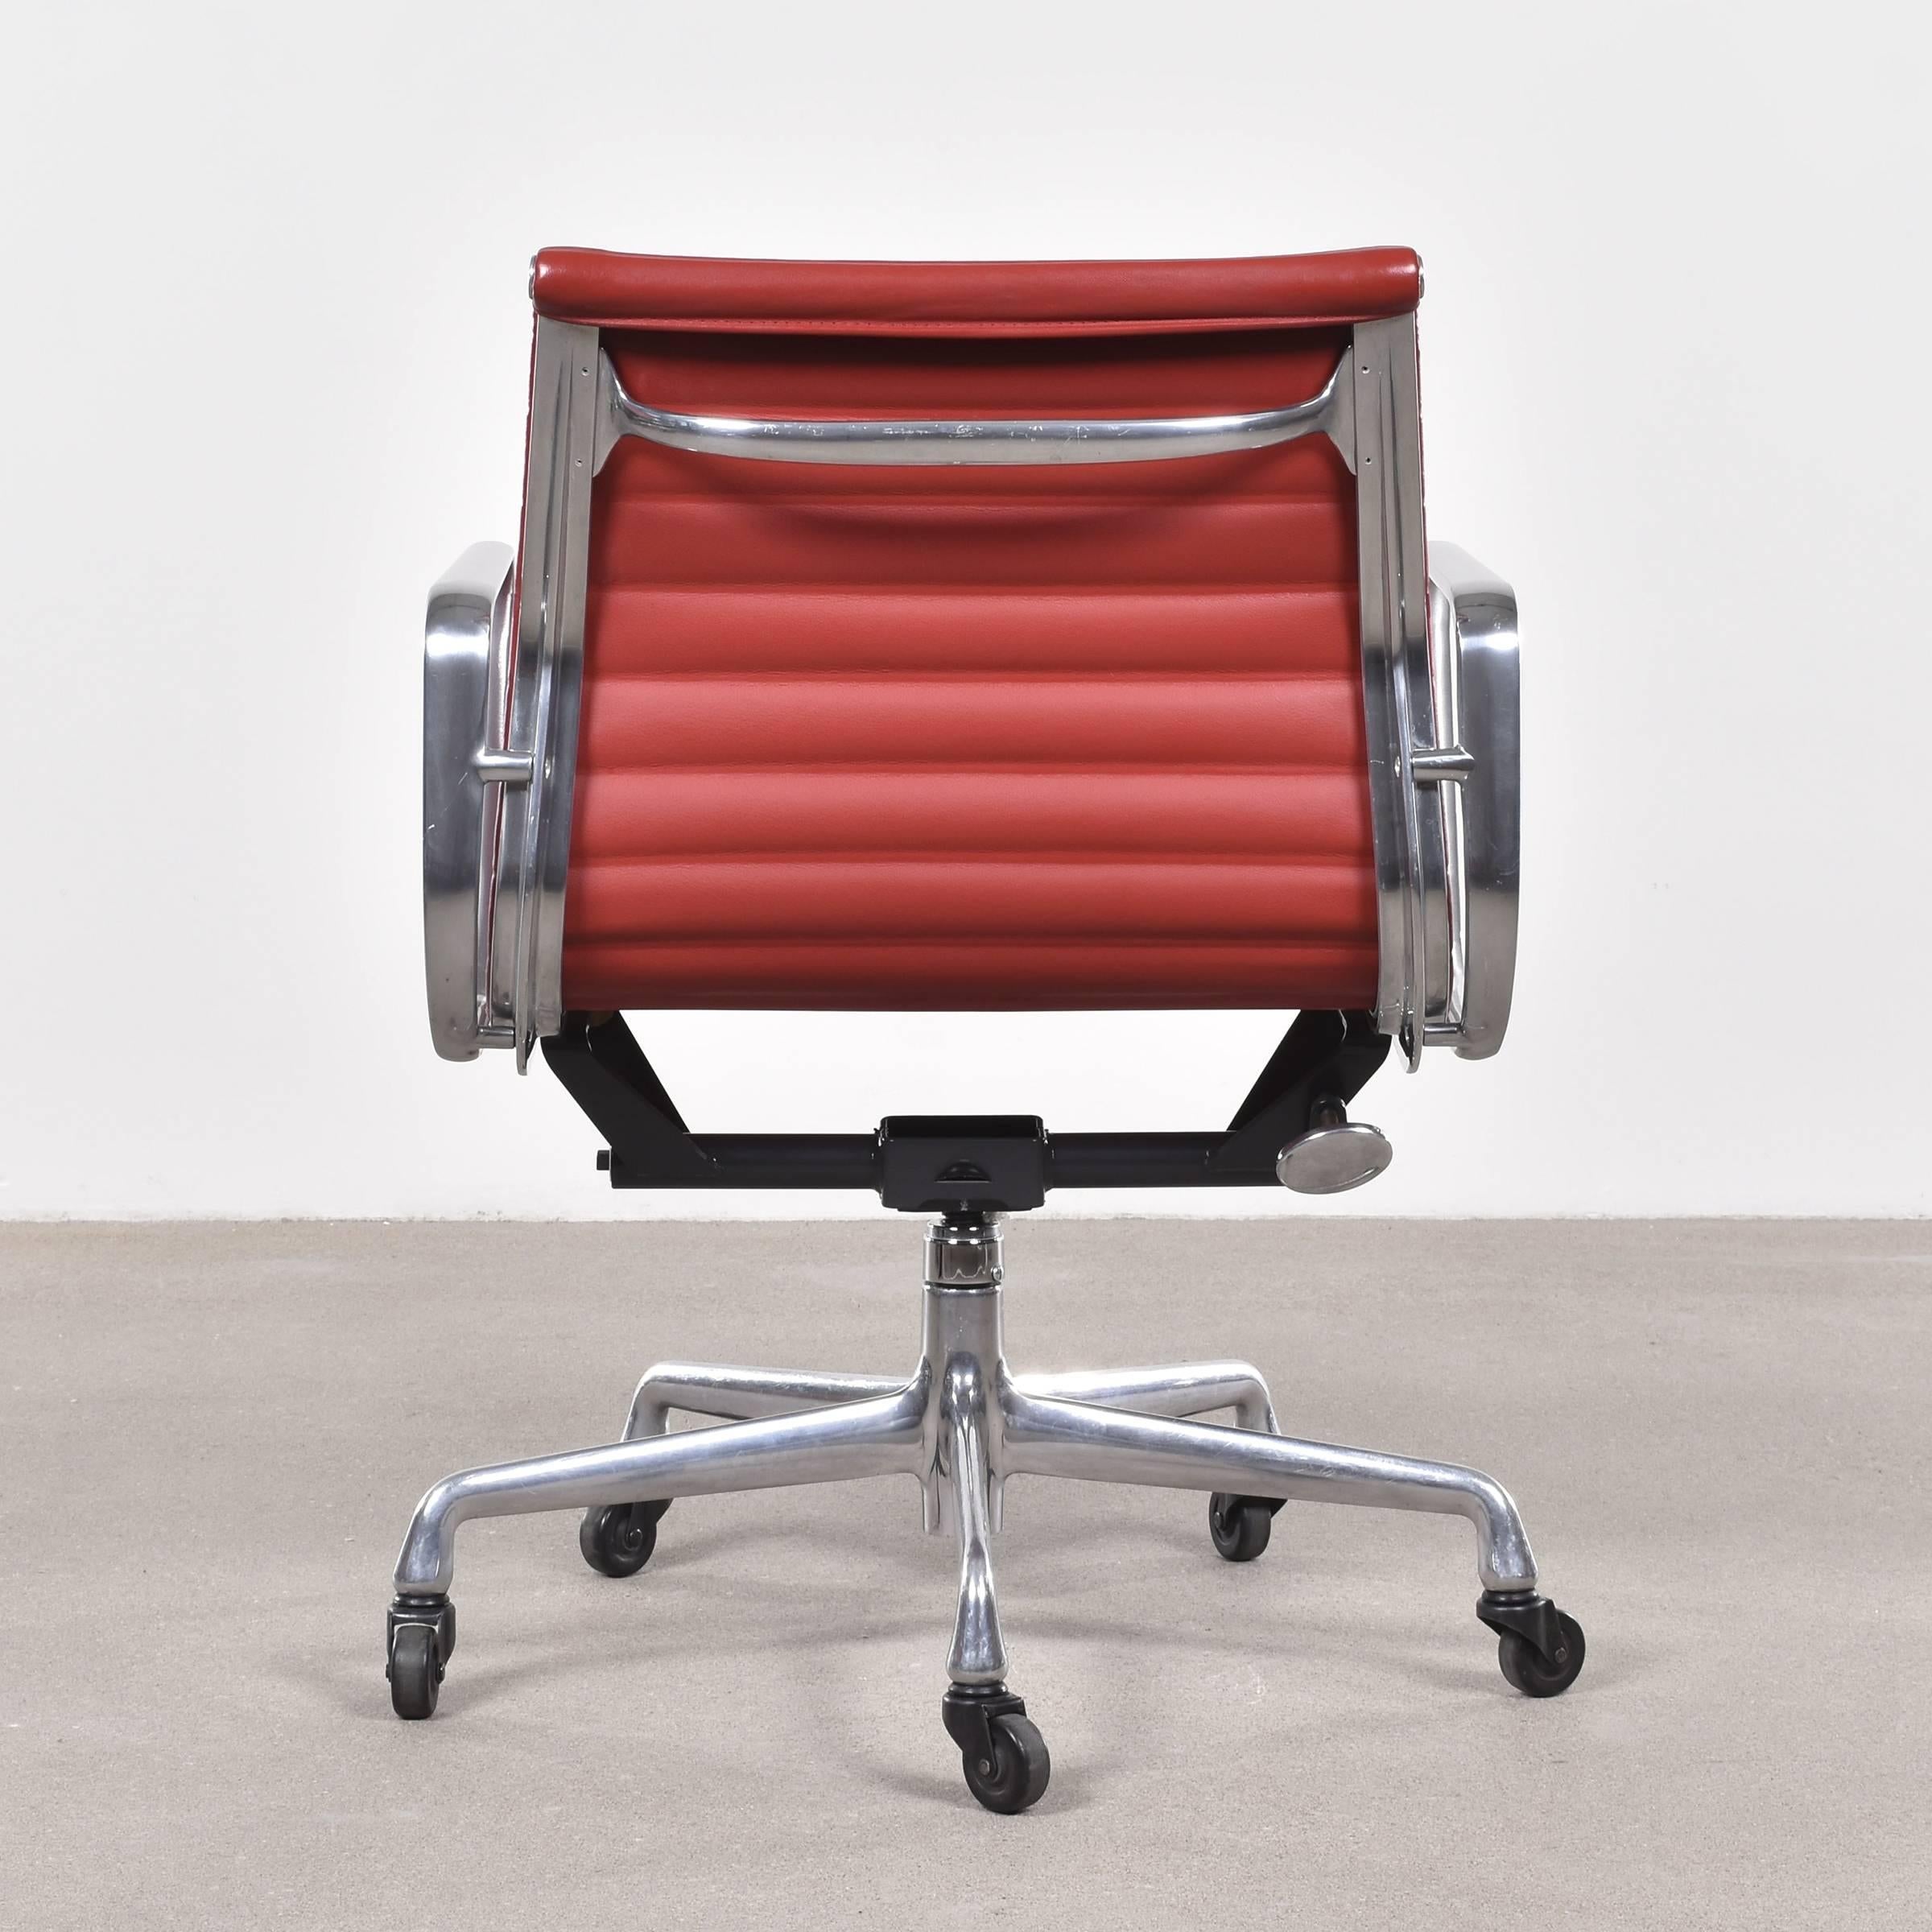 red leather office chair